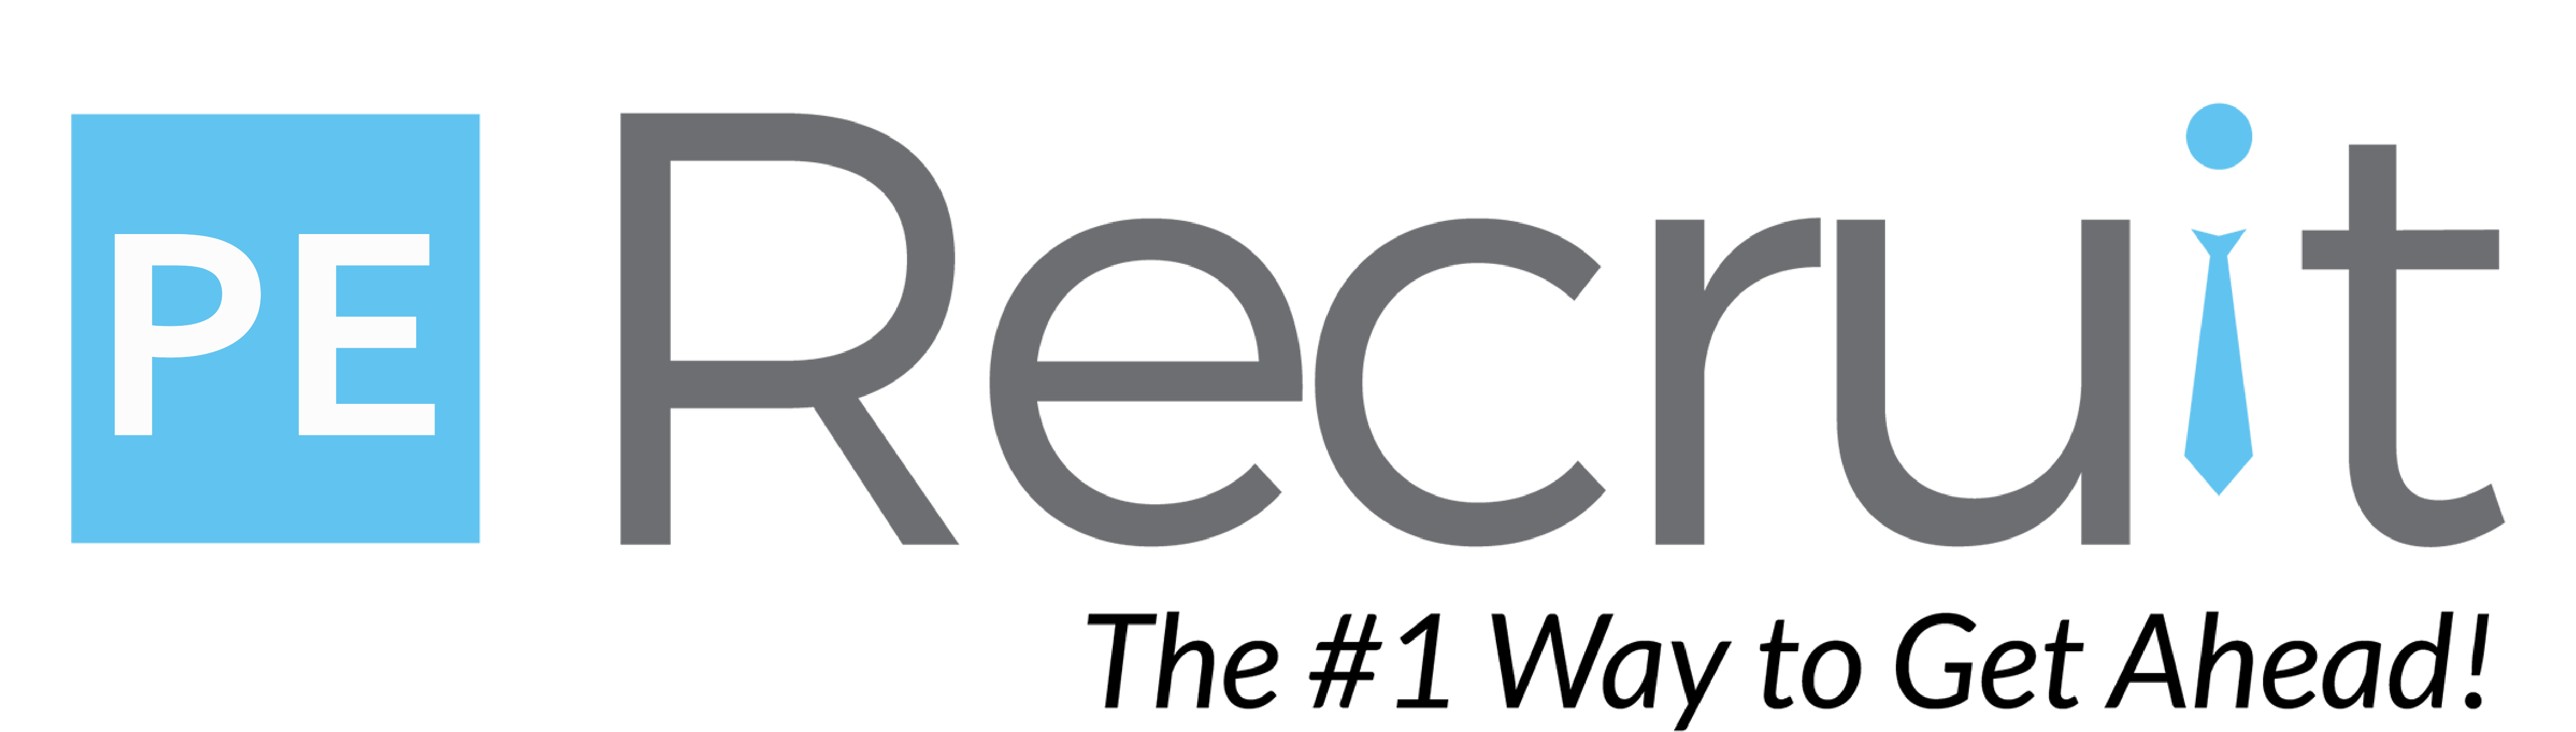 peRecruit - Free Directory of Recruiters and Executive Search Firms